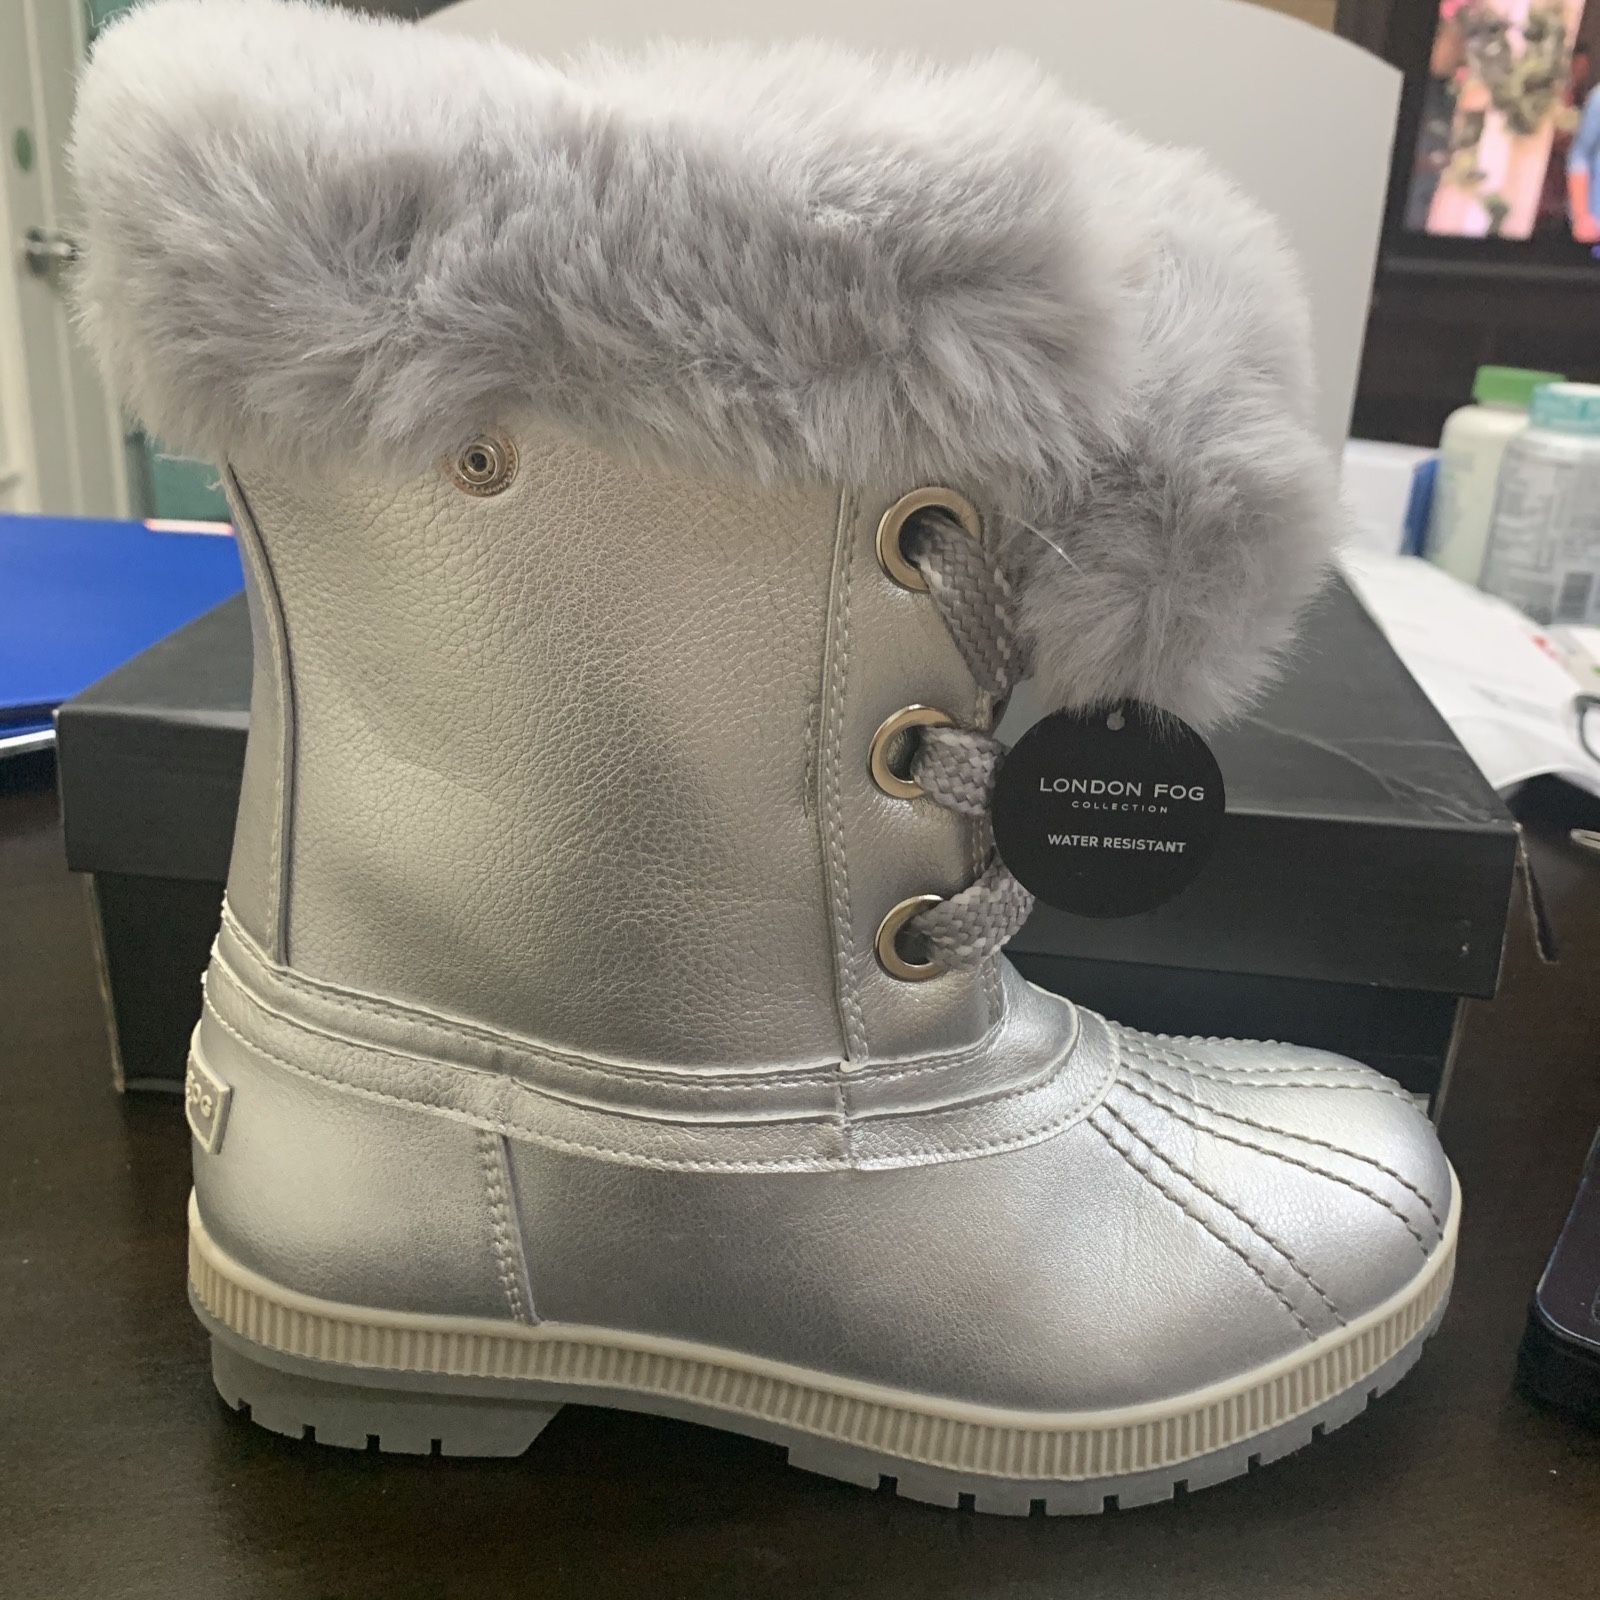 London Fog Milly Winter Snow Boots Womens 9M Silver Smooth Faux Fur Brand New